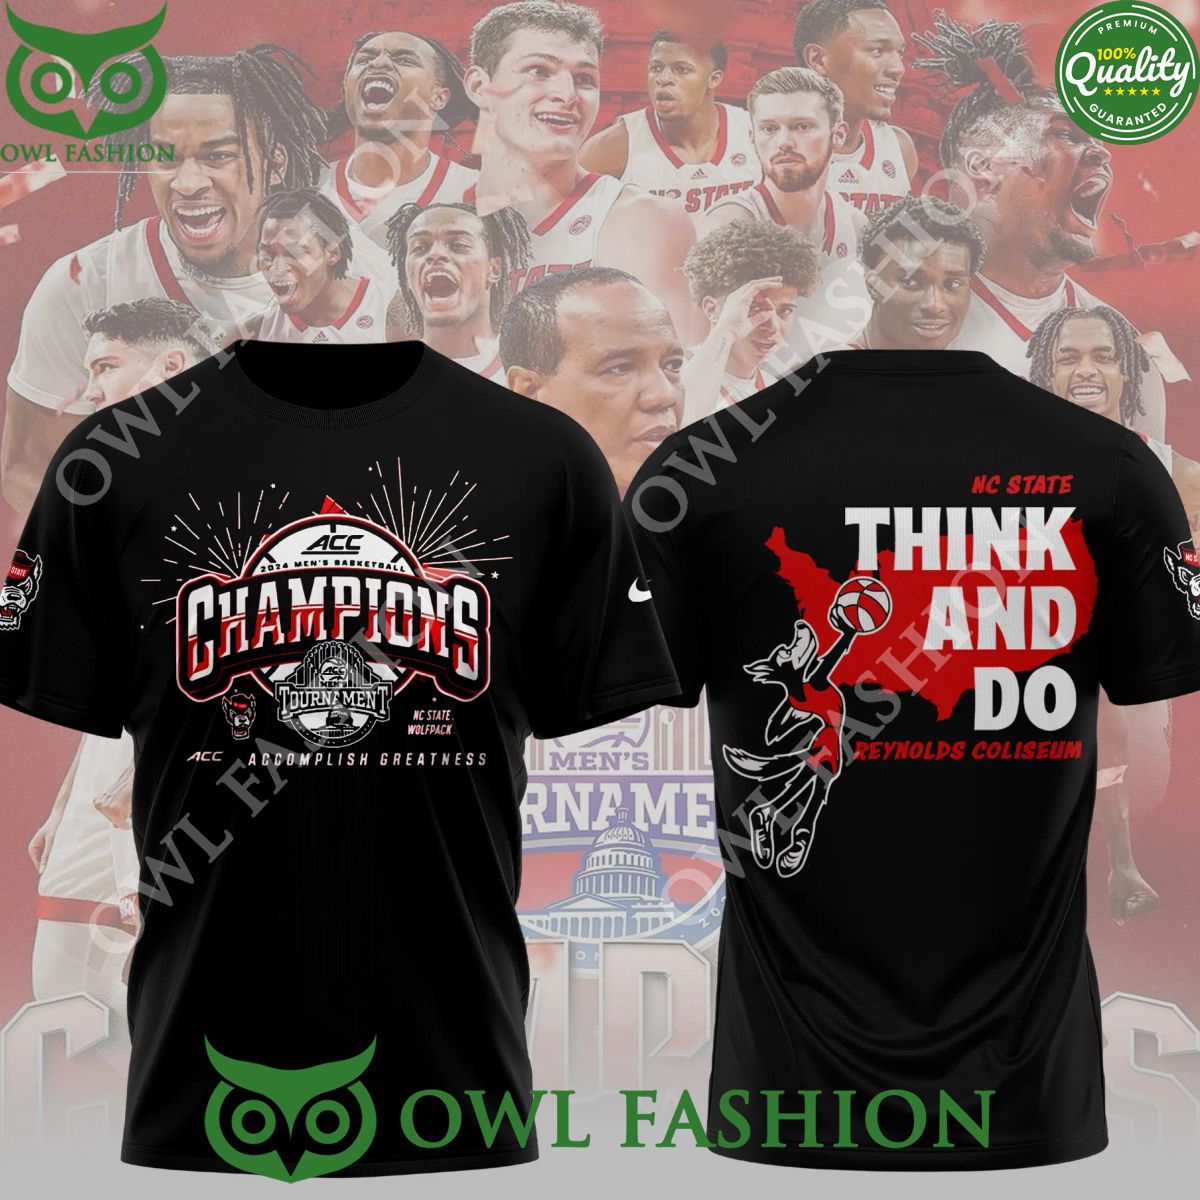 NC State Wolfpack mens basketball ACC Think and Do Reynolds Coliseum championship t shirt